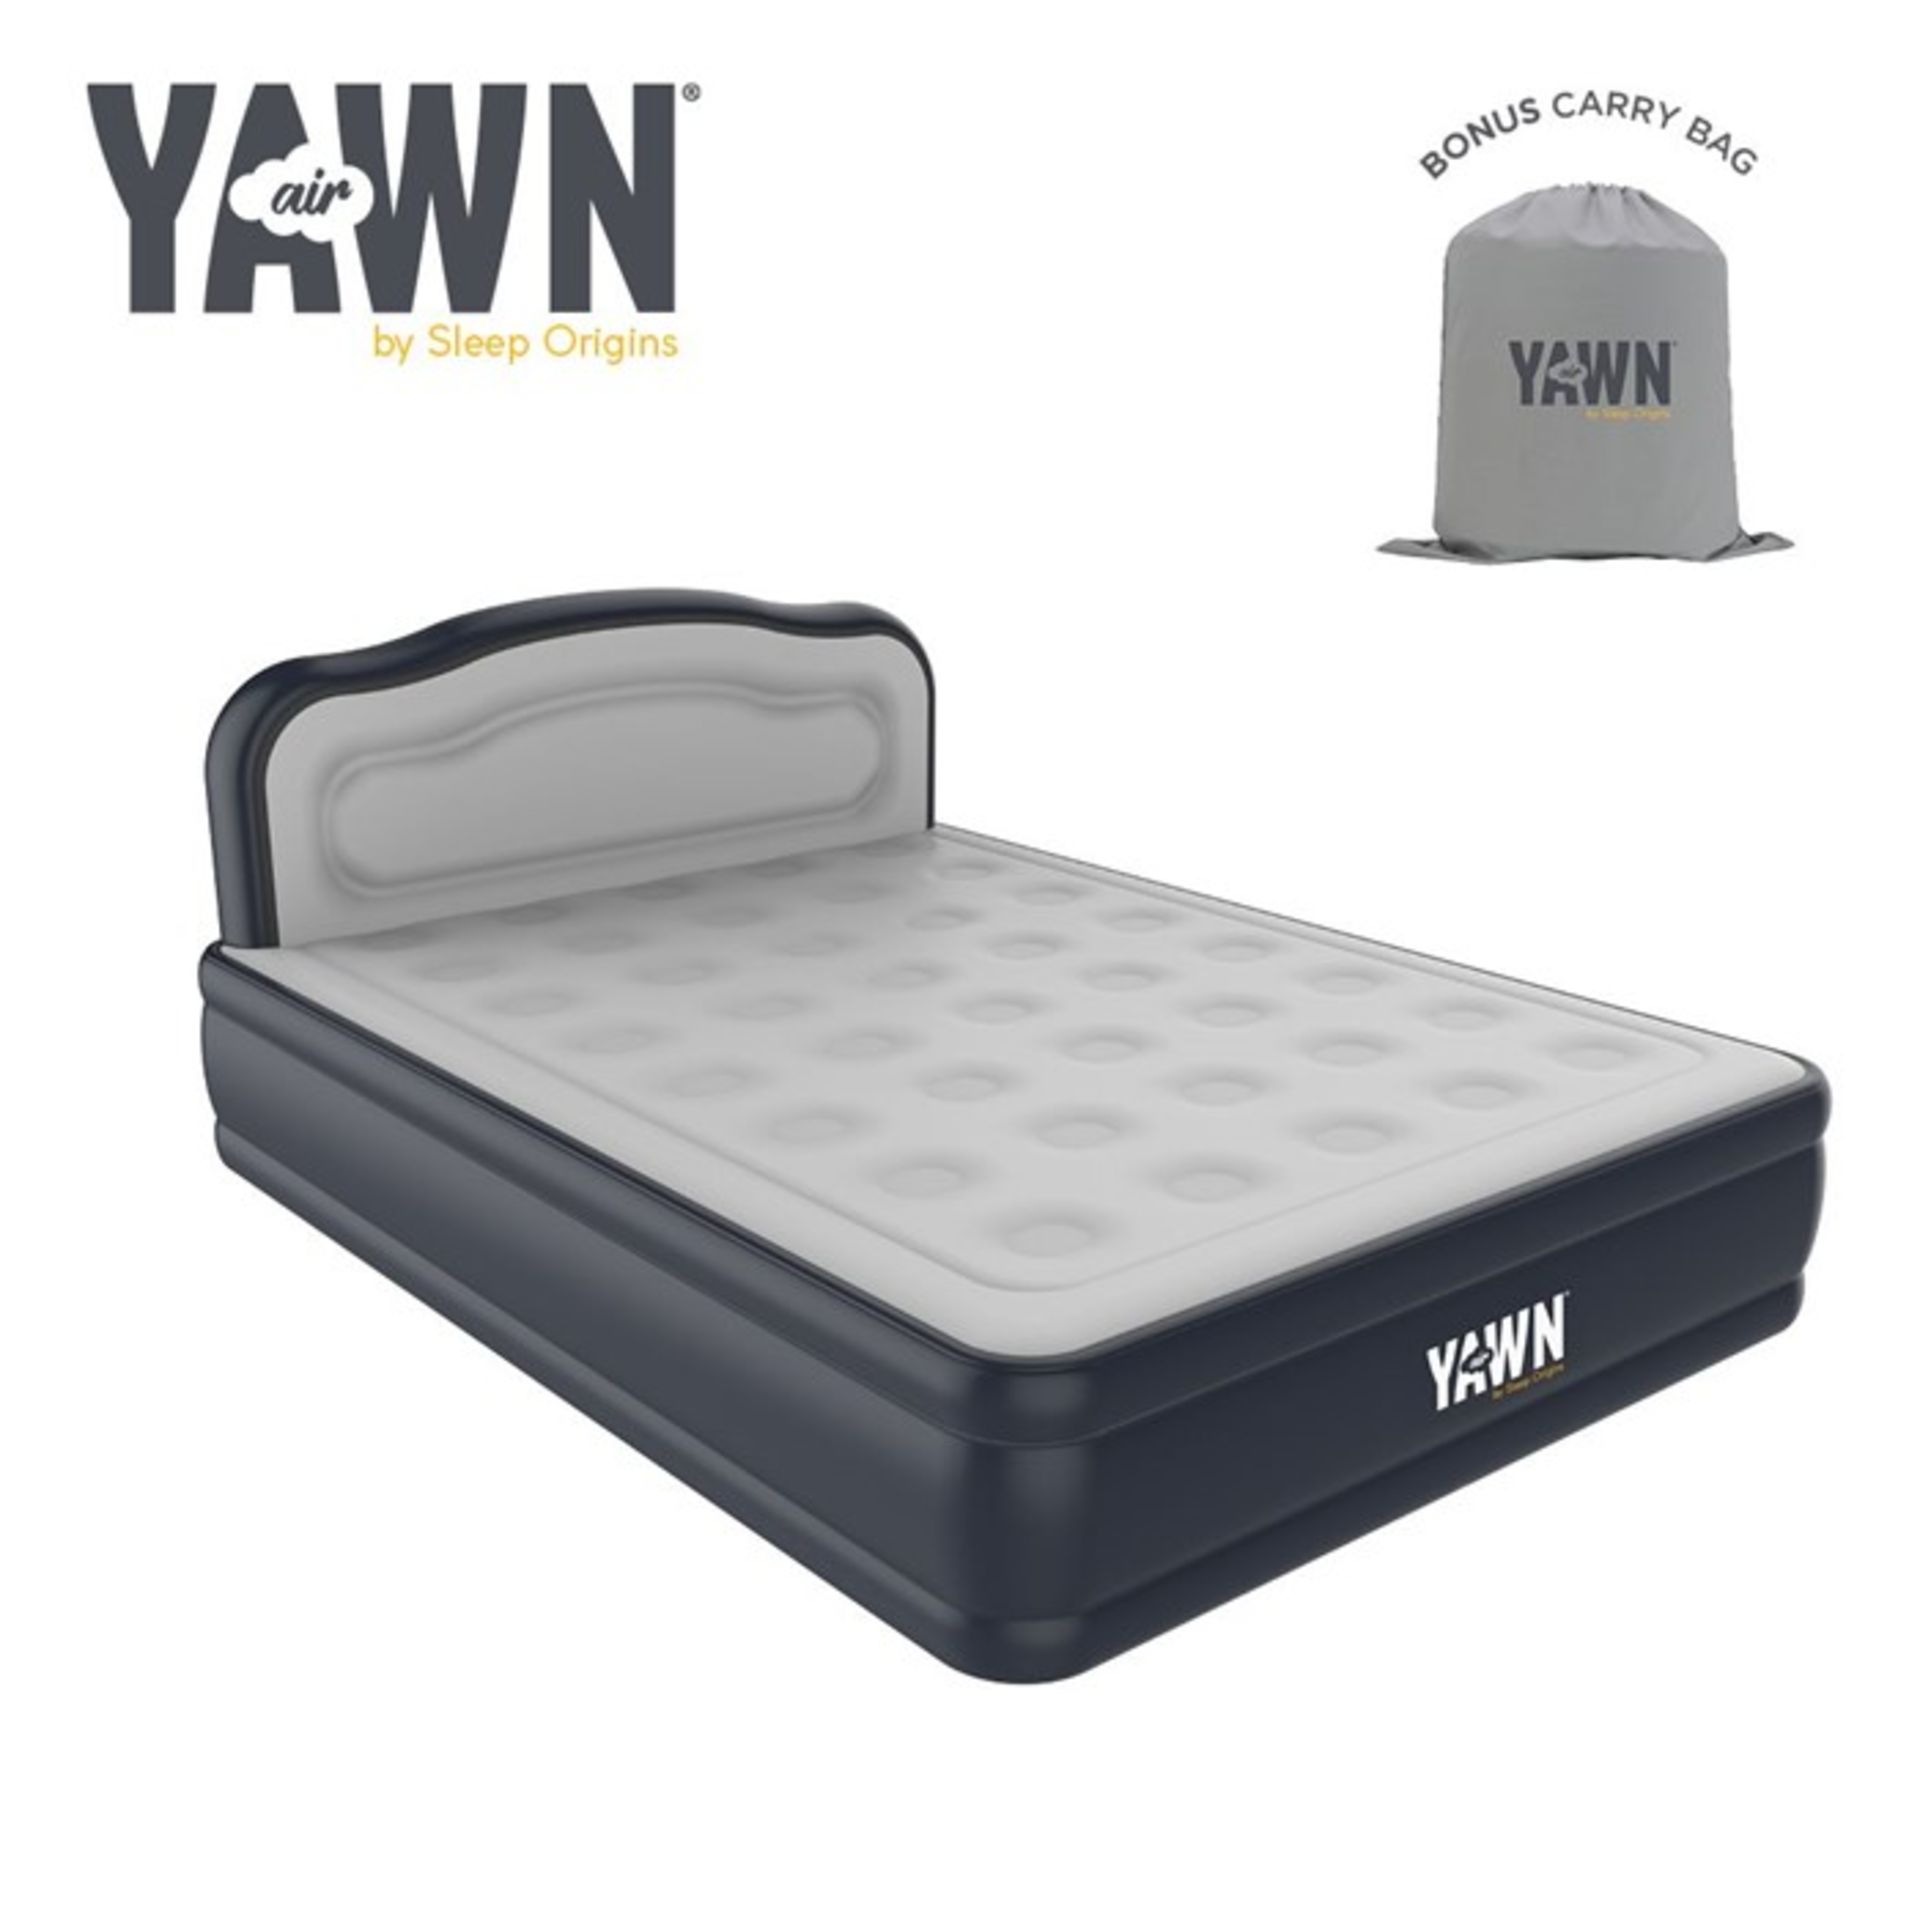 1x Pallet of Yawn Air Beds - various sizes - Single / Double / King Size - rrp £69.99 each  appx